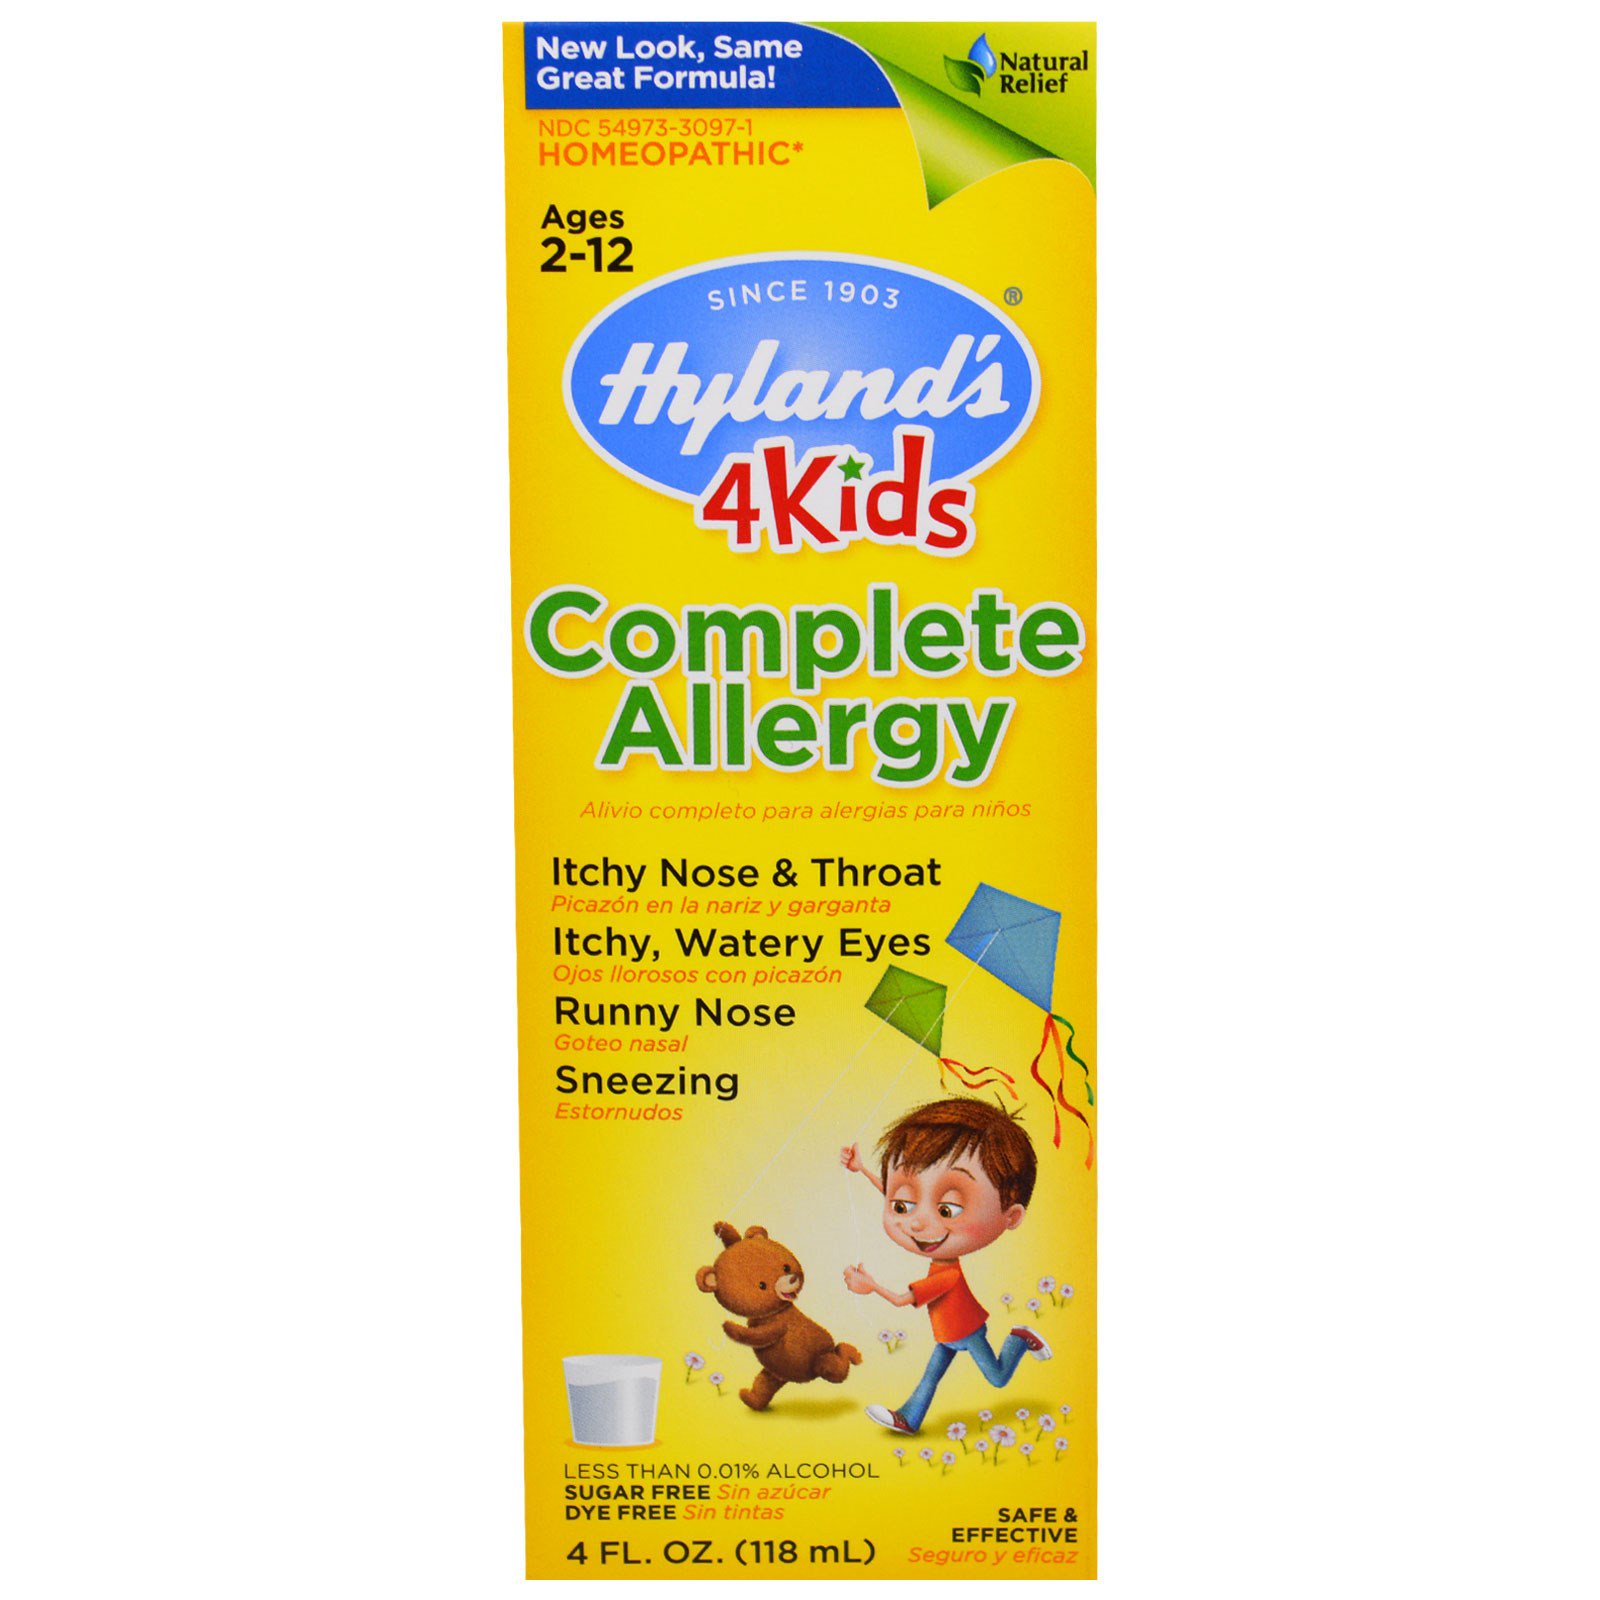 Hyland S 4kids Cold And Cough Dosage Chart